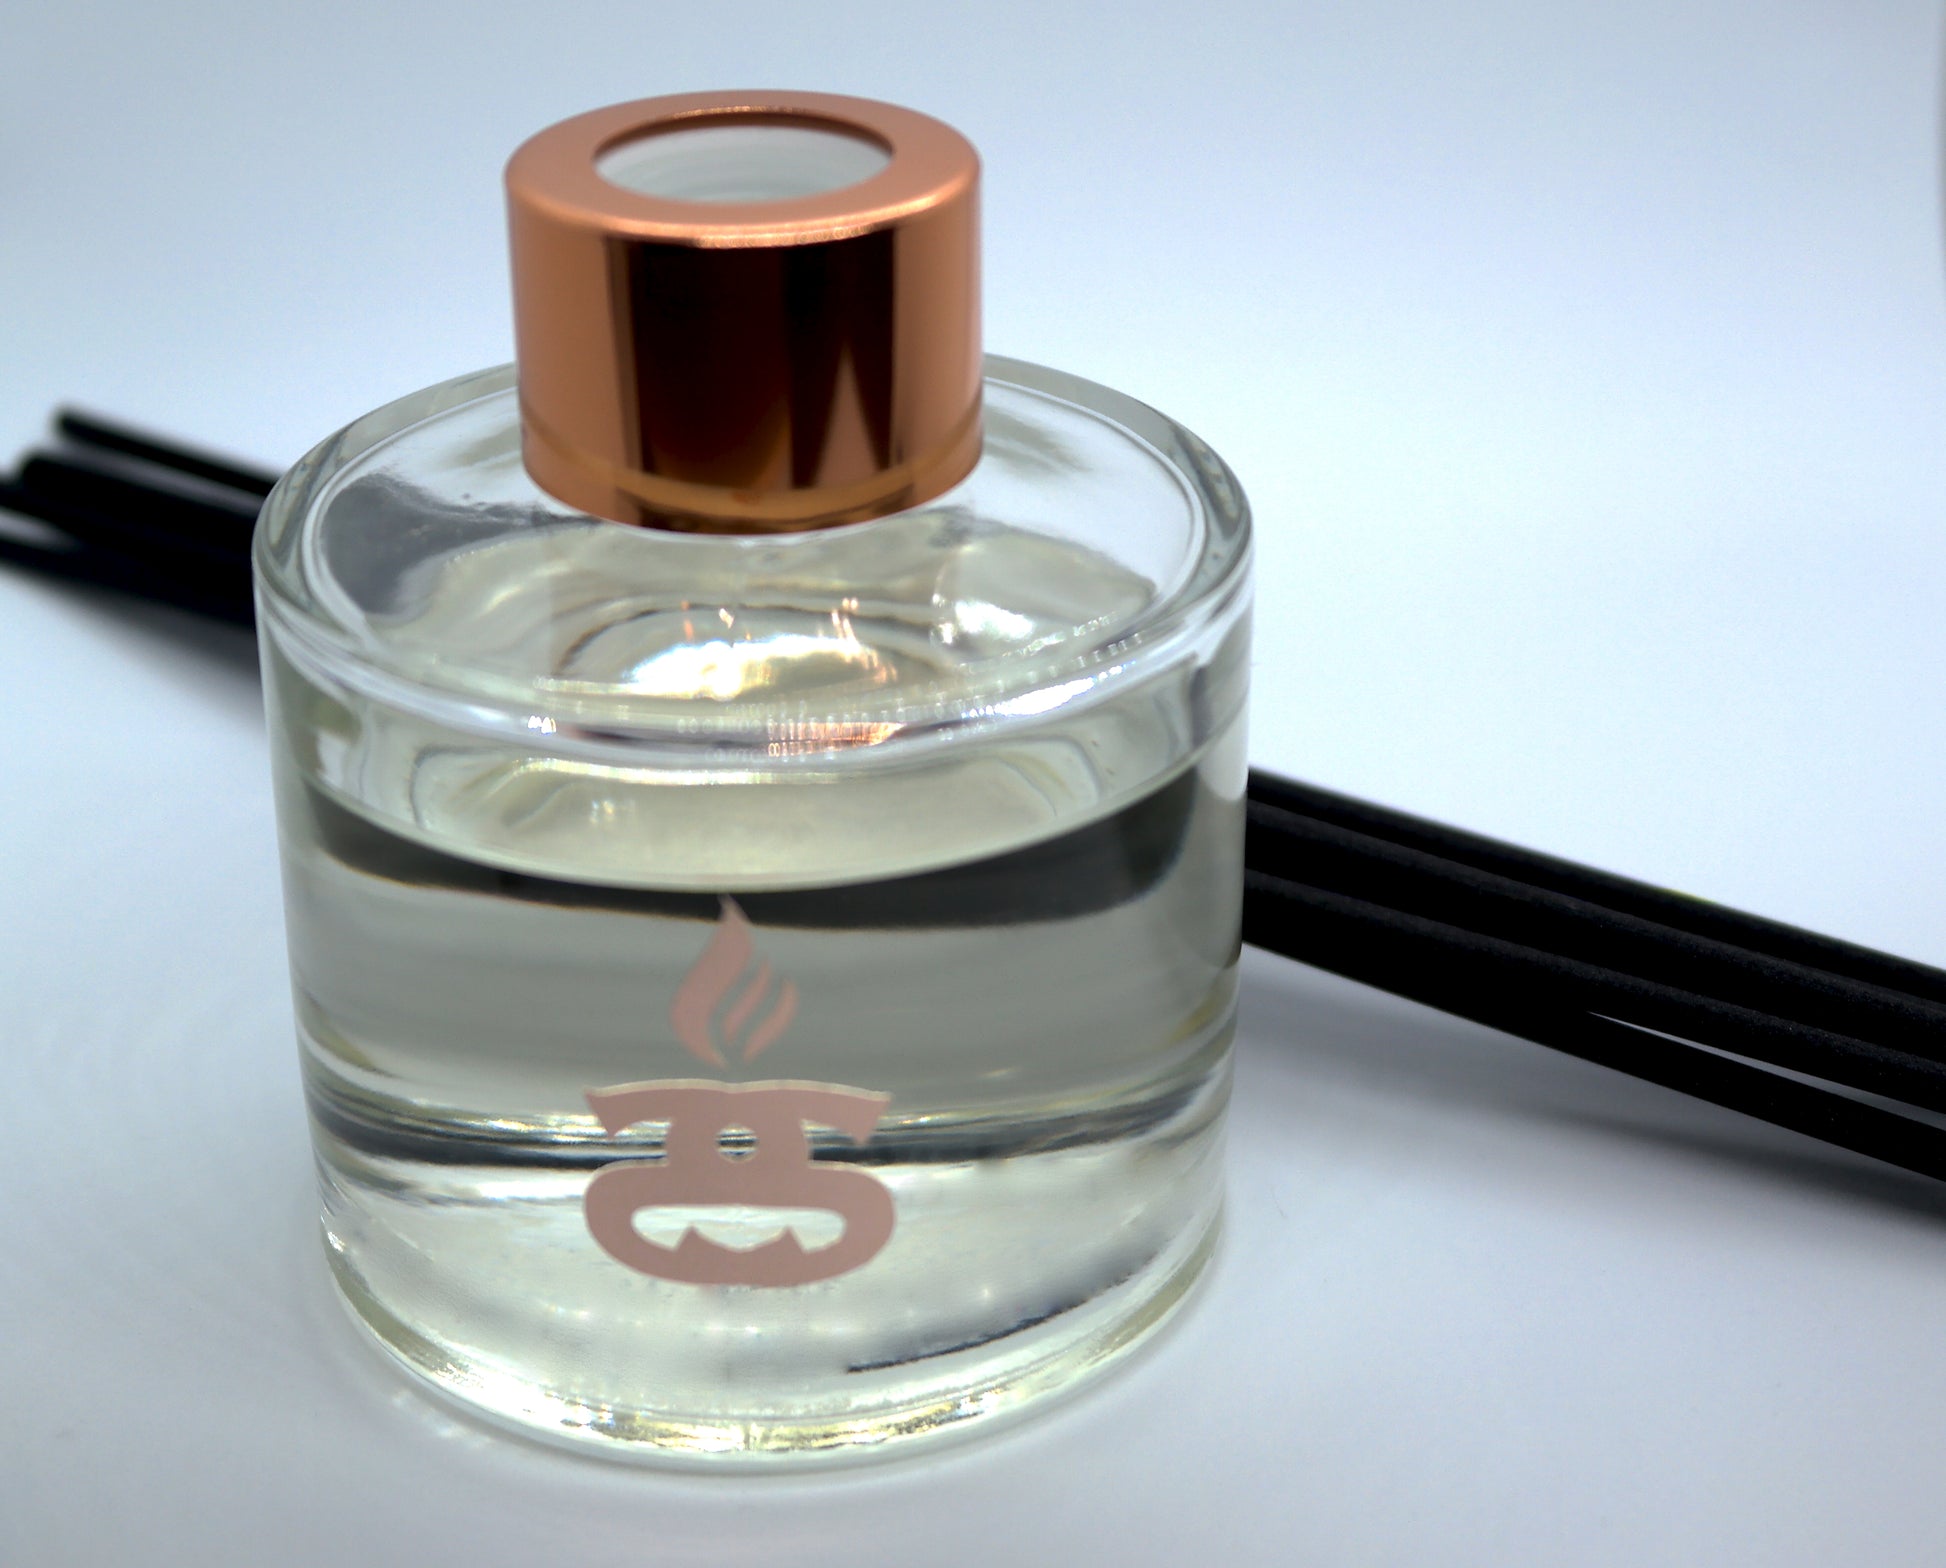 Simple Scents Excellence Reed Diffuser in 100ml glass squat bottle with rose gold cap lid and black fibre reeds laid horizontally behind